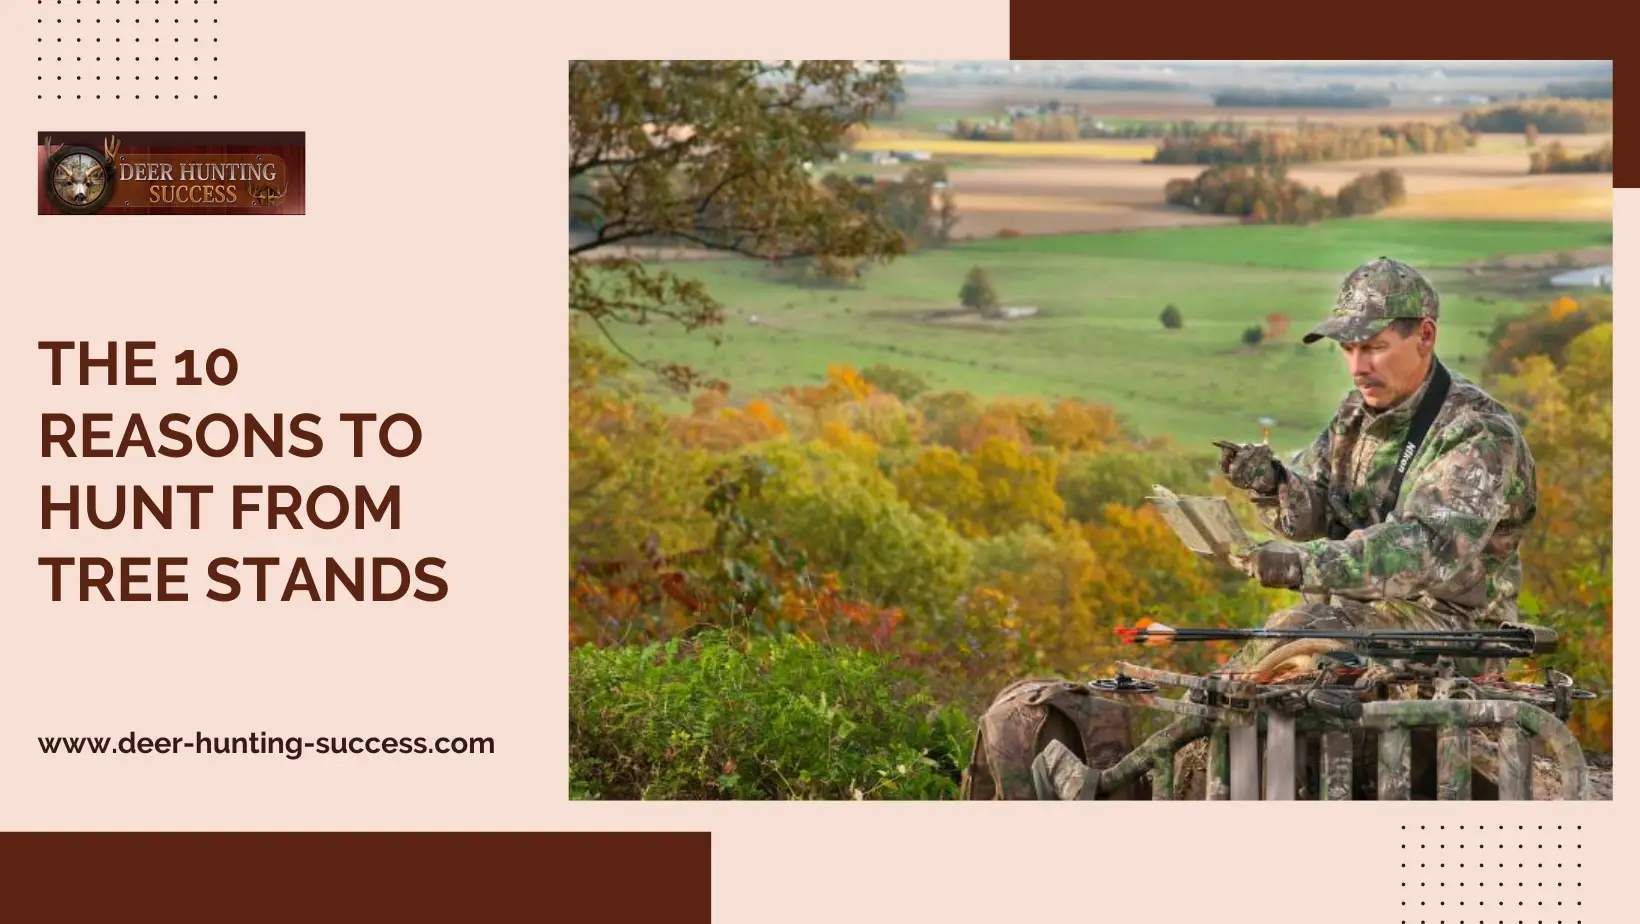 The 10 Reasons to Hunt From Tree Stands